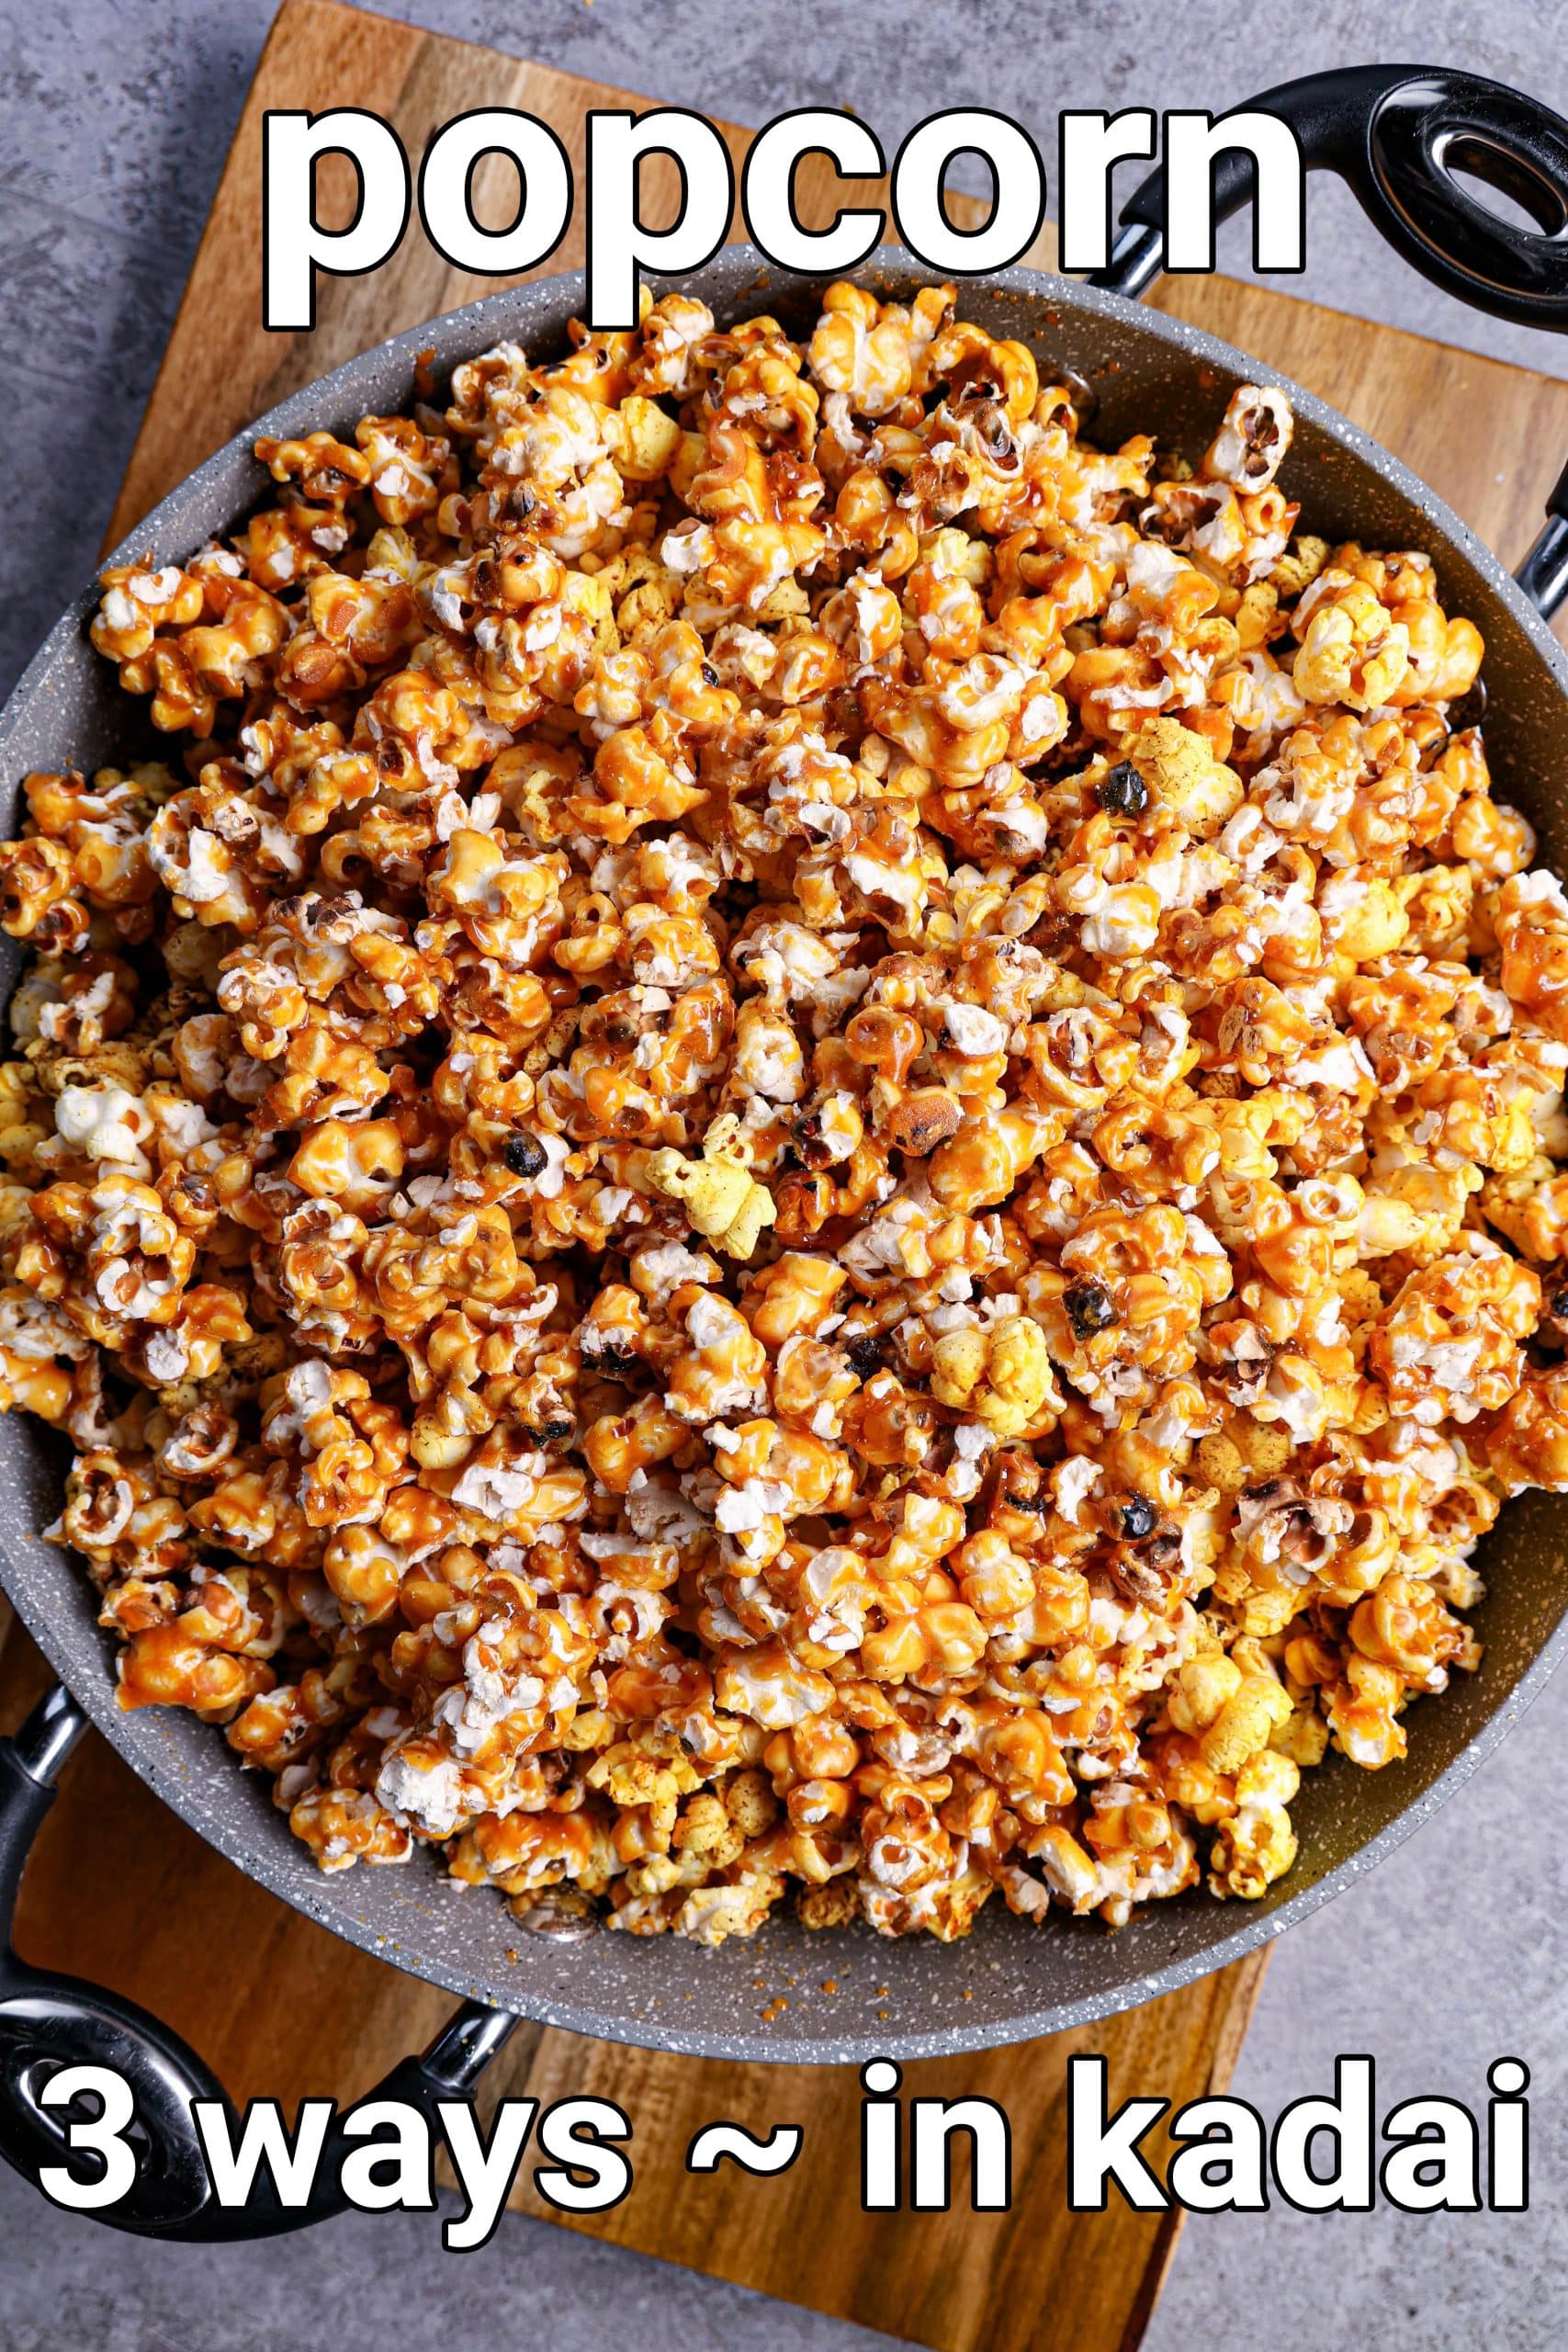 Soft and Chewy Caramel Popcorn - Mel's Kitchen Cafe